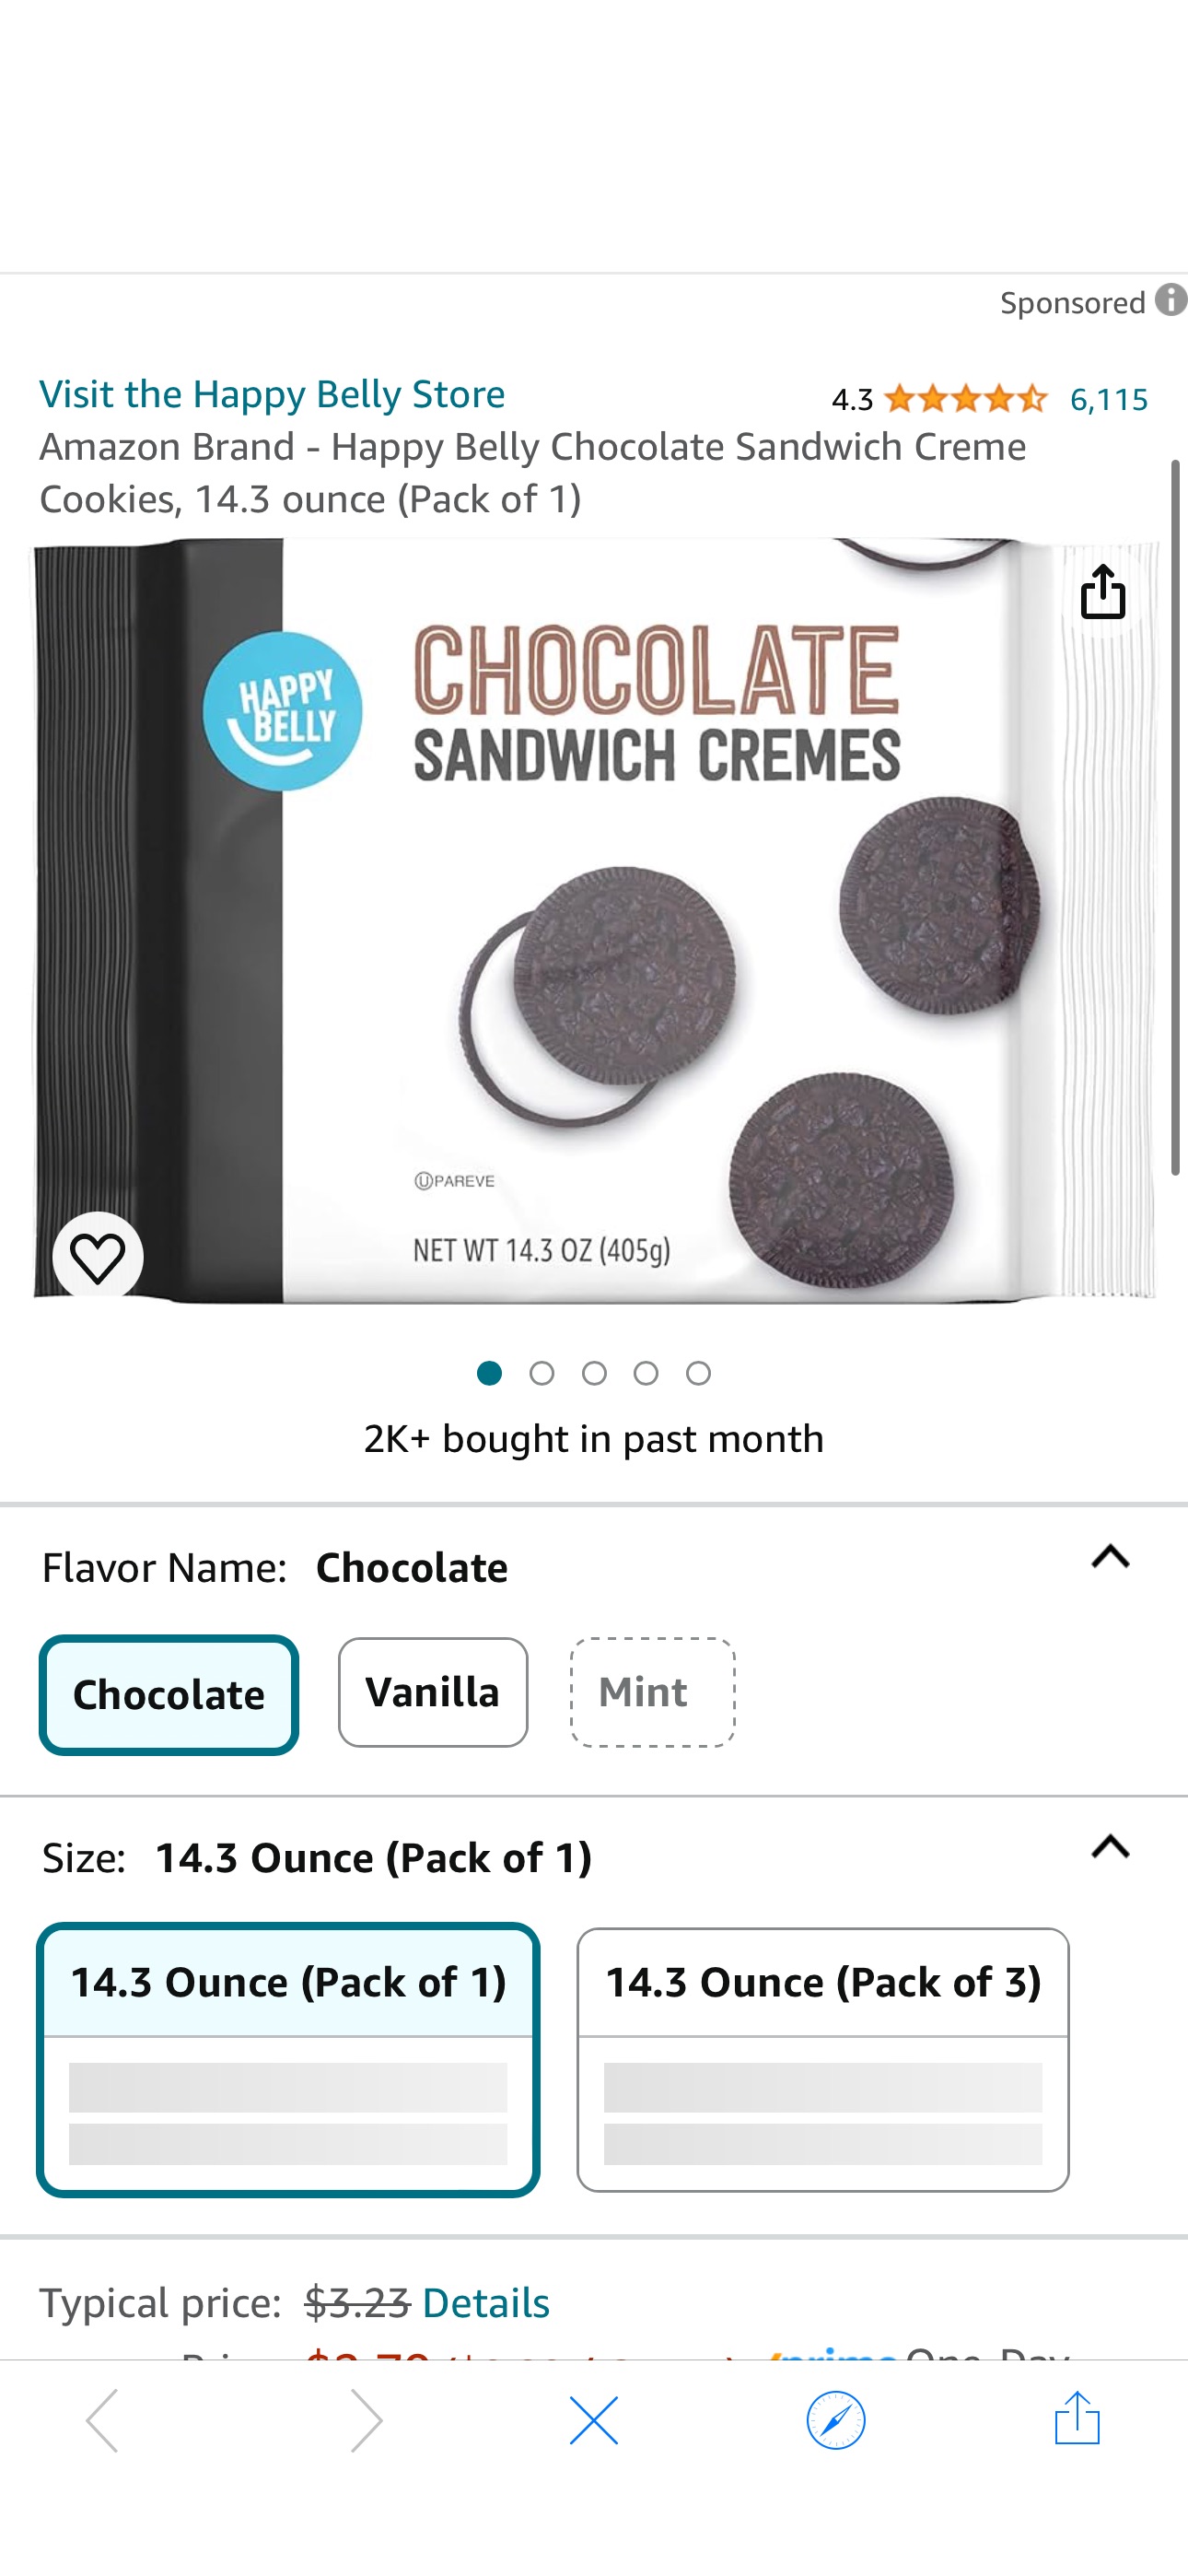 Amazon.com: Amazon Brand - Happy Belly Chocolate Sandwich Creme Cookies, 14.3 ounce (Pack of 1) : Grocery & Gourmet Food